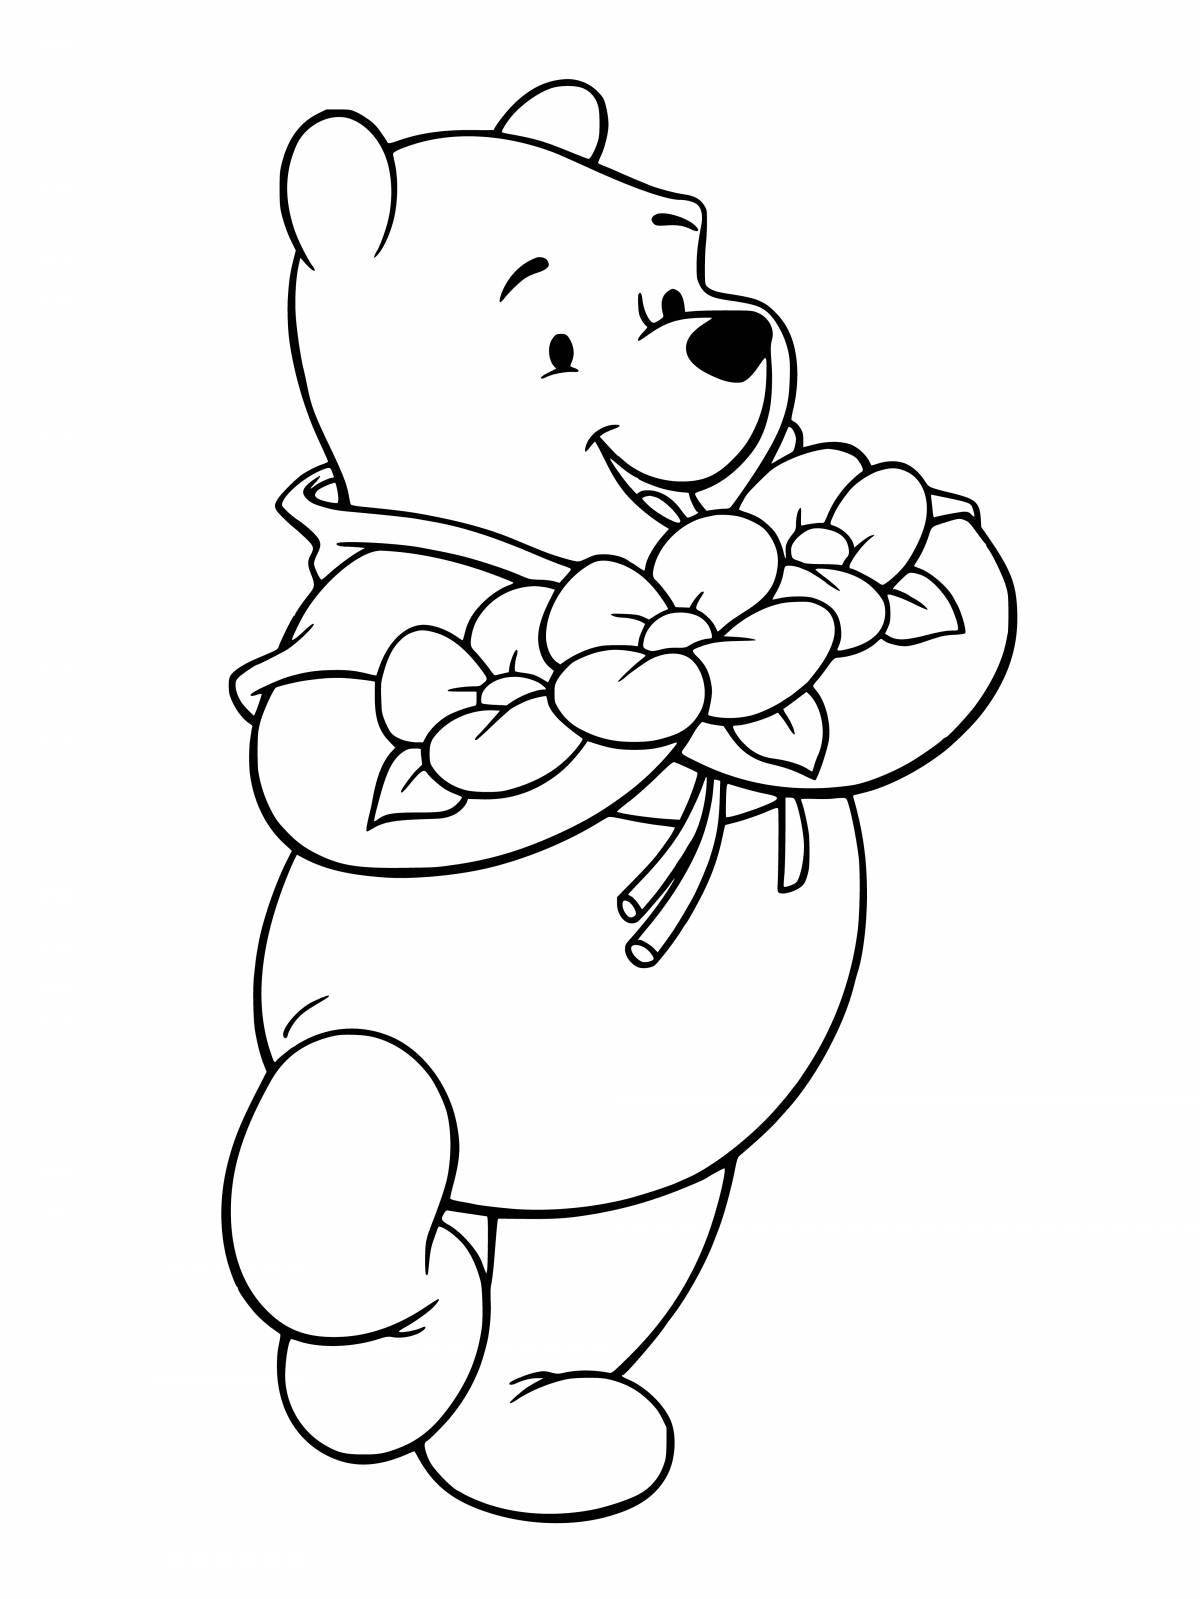 Winnie the Pooh fun coloring for kids